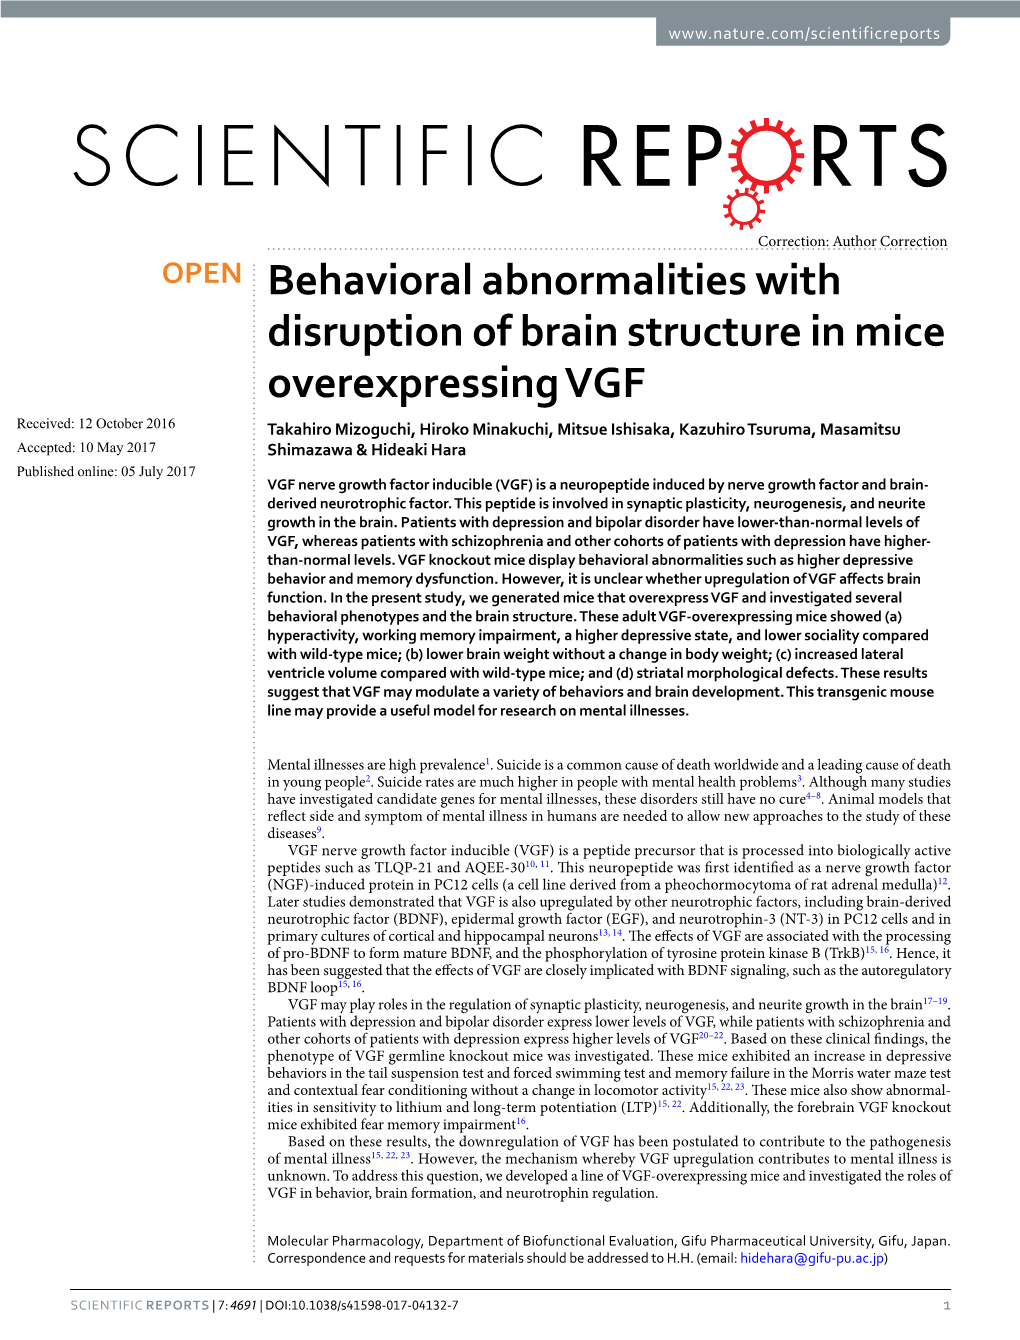 Behavioral Abnormalities with Disruption of Brain Structure in Mice Overexpressing